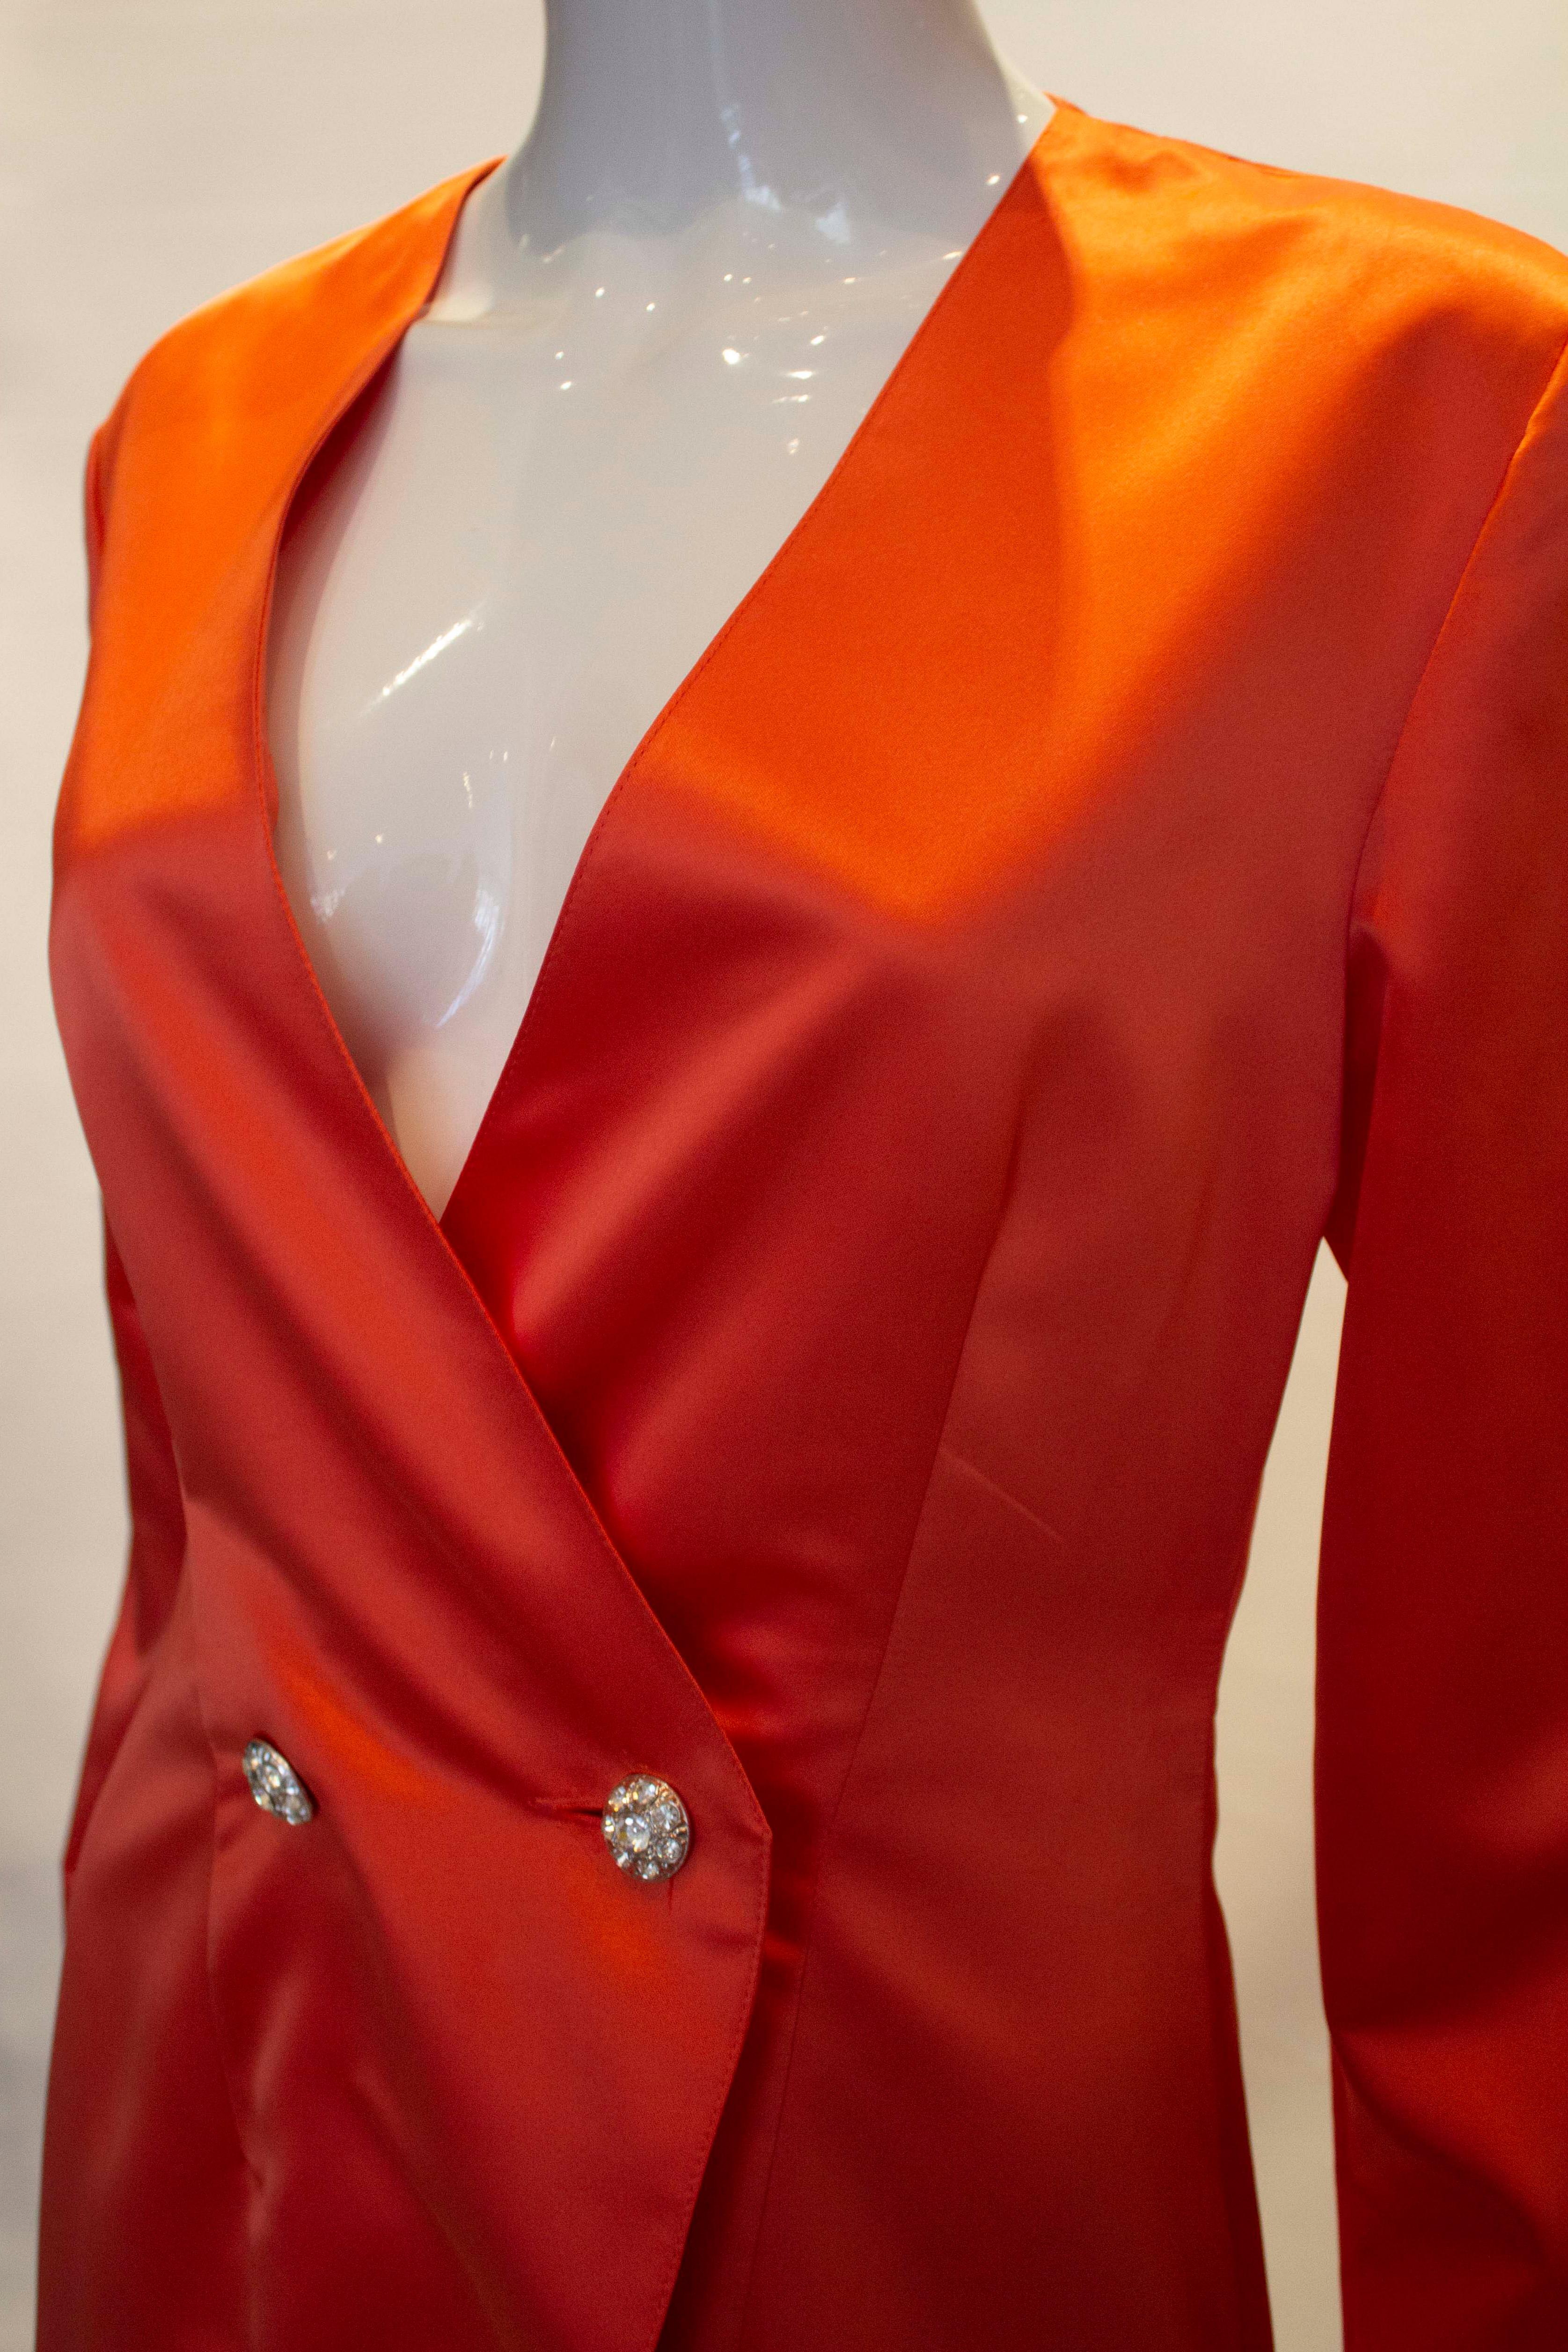 A head turning evening jacket by Vera Mont. The jacket is in a pretty salmon pink colour with a two button diamante fastening. It has a v neckline, with a slit at the back and is fully lined.